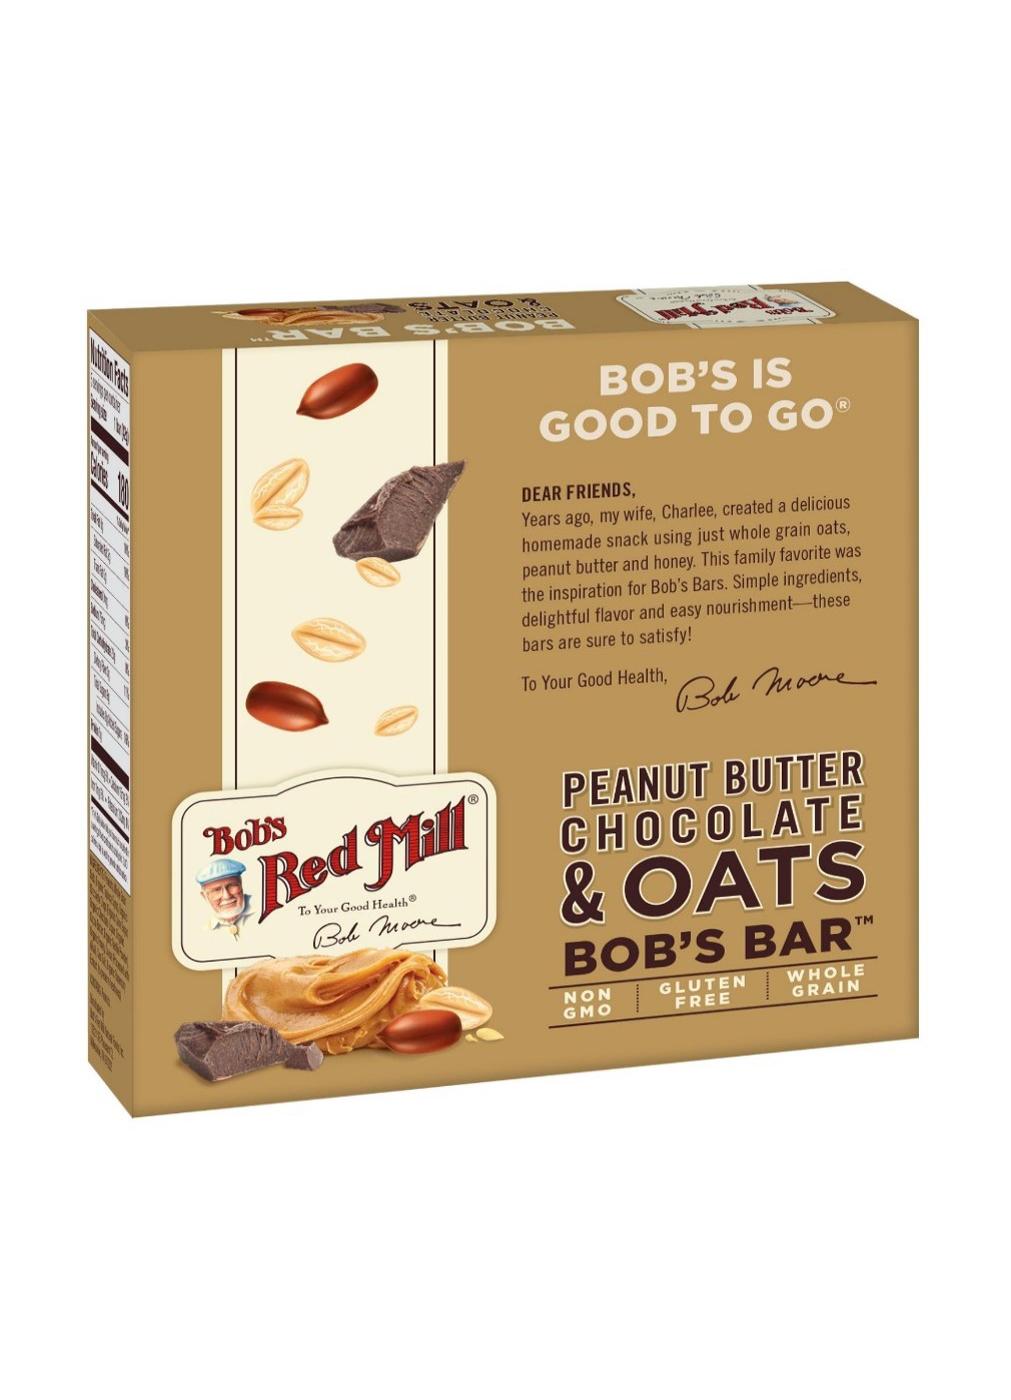 Bob's Red Mill Peanut Butter Chocolate & Oats Bob's Bars; image 2 of 2